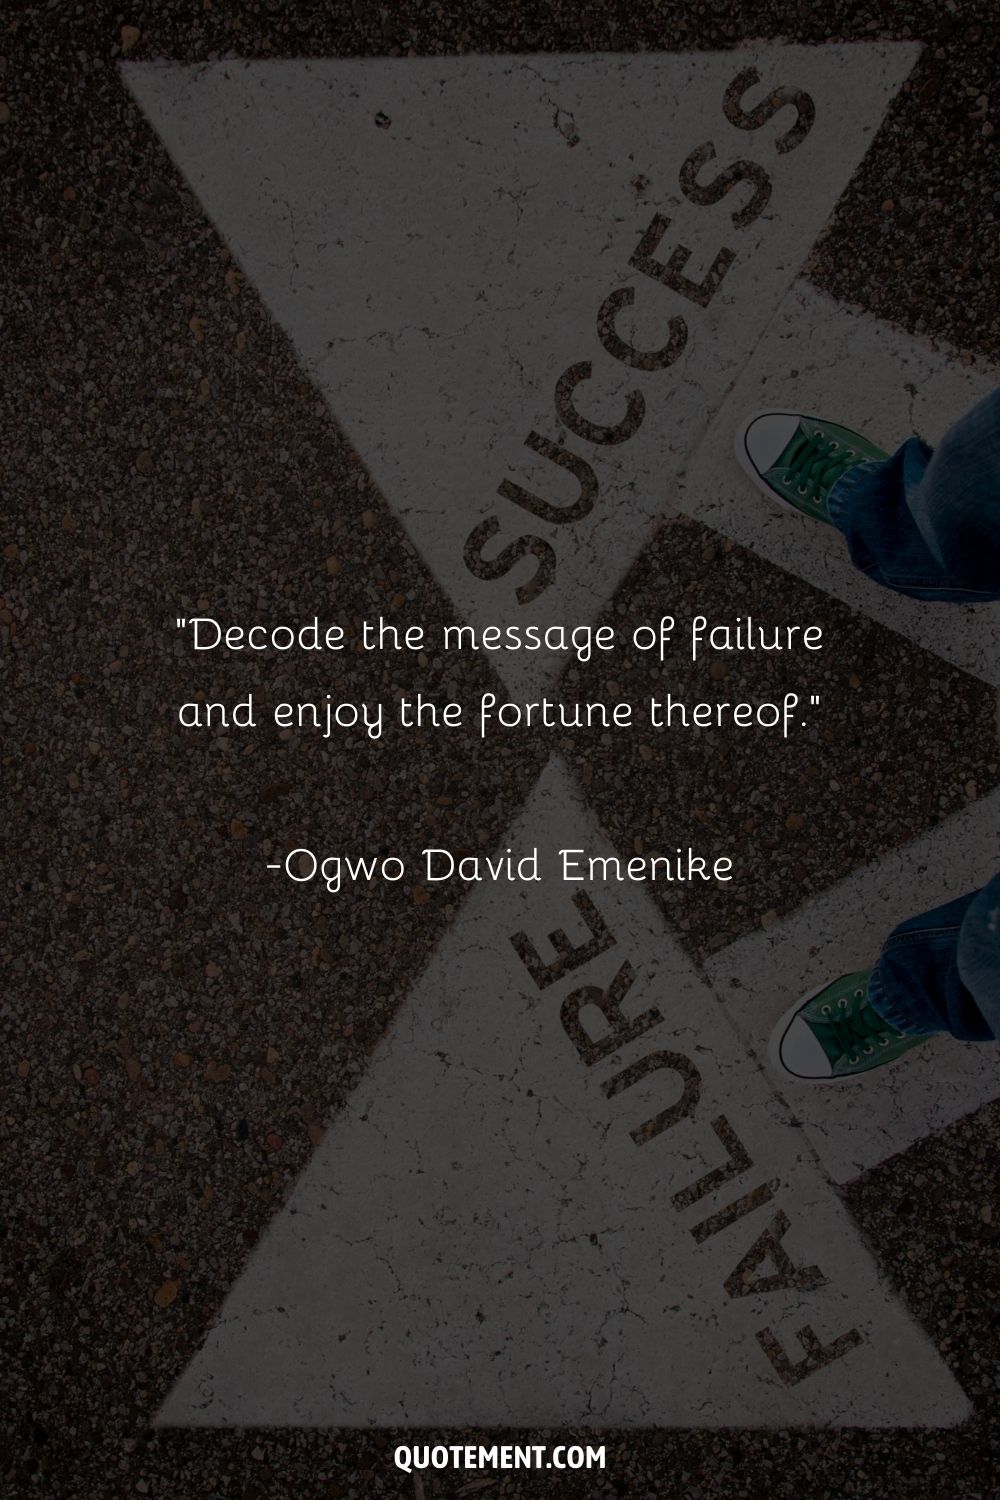 “Decode the message of failure and enjoy the fortune thereof.” ― Ogwo David Emenike, The Fortune in Failing Decoding the Message of Failure